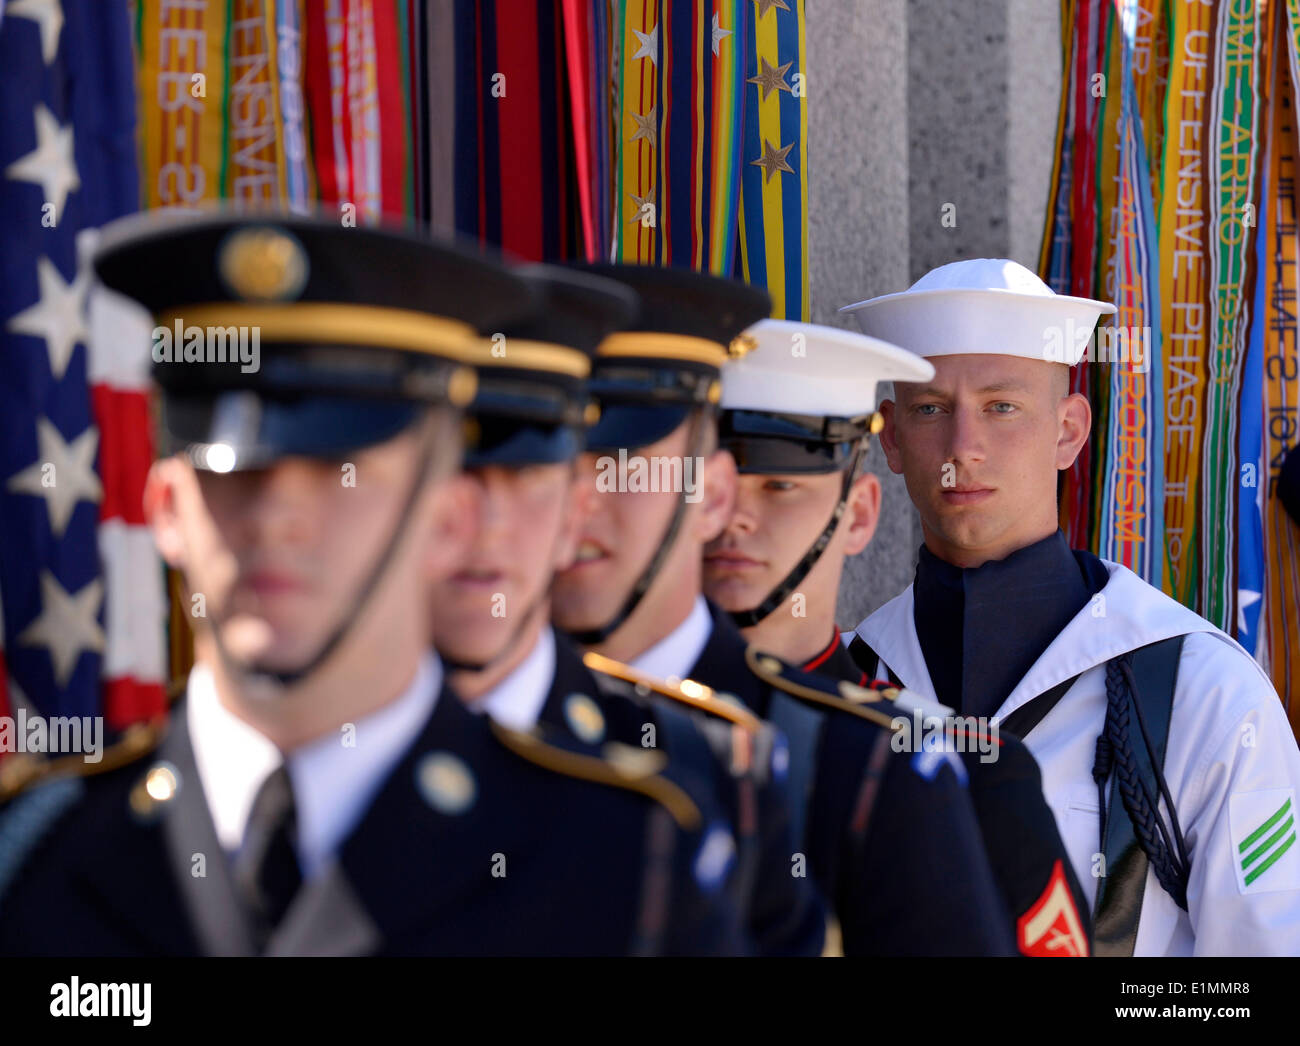 Washington, DC, USA. 6th June, 2014. Honor guard members are seen during a ceremony marking the 70th anniversary of the D-Day Normandy landings in World War II, in Washington, DC, the United States, on June 6, 2014. Credit:  Yin Bogu/Xinhua/Alamy Live News Stock Photo